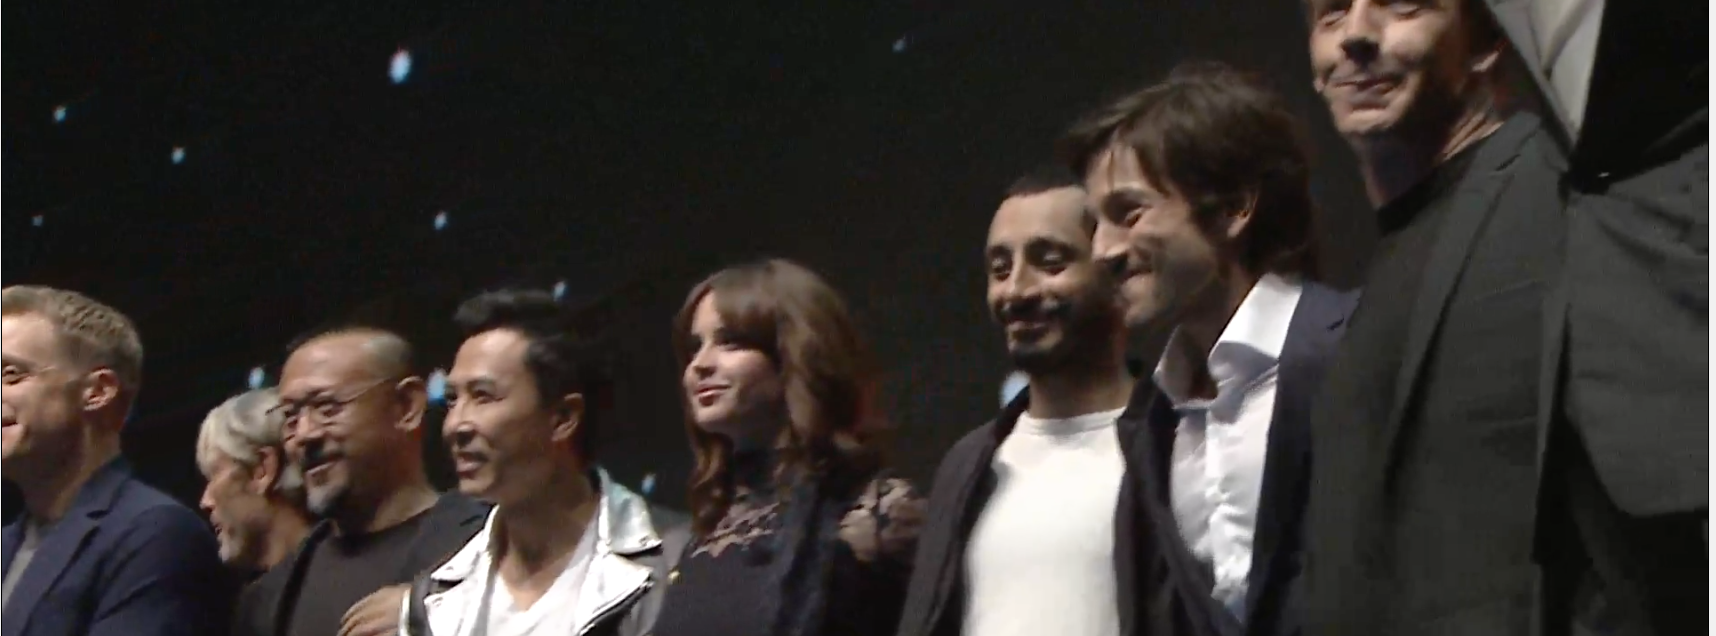 ‘Rogue One’ SWC Panel Shows New Footage